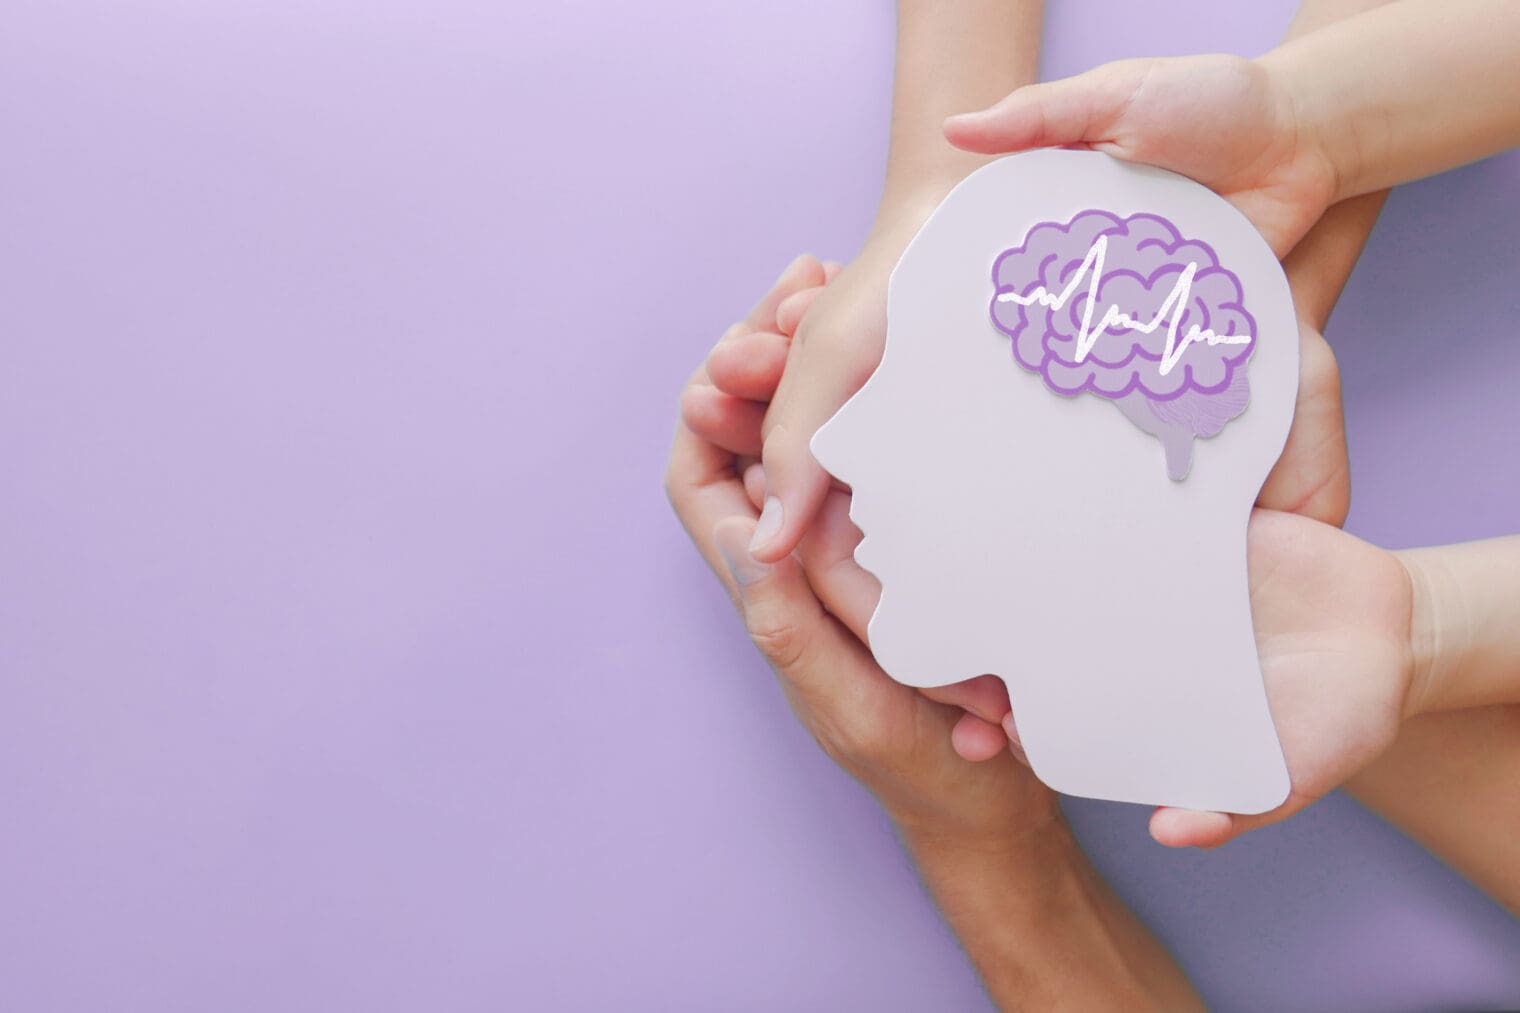 Adult and child hands holding encephalography brain paper cutout